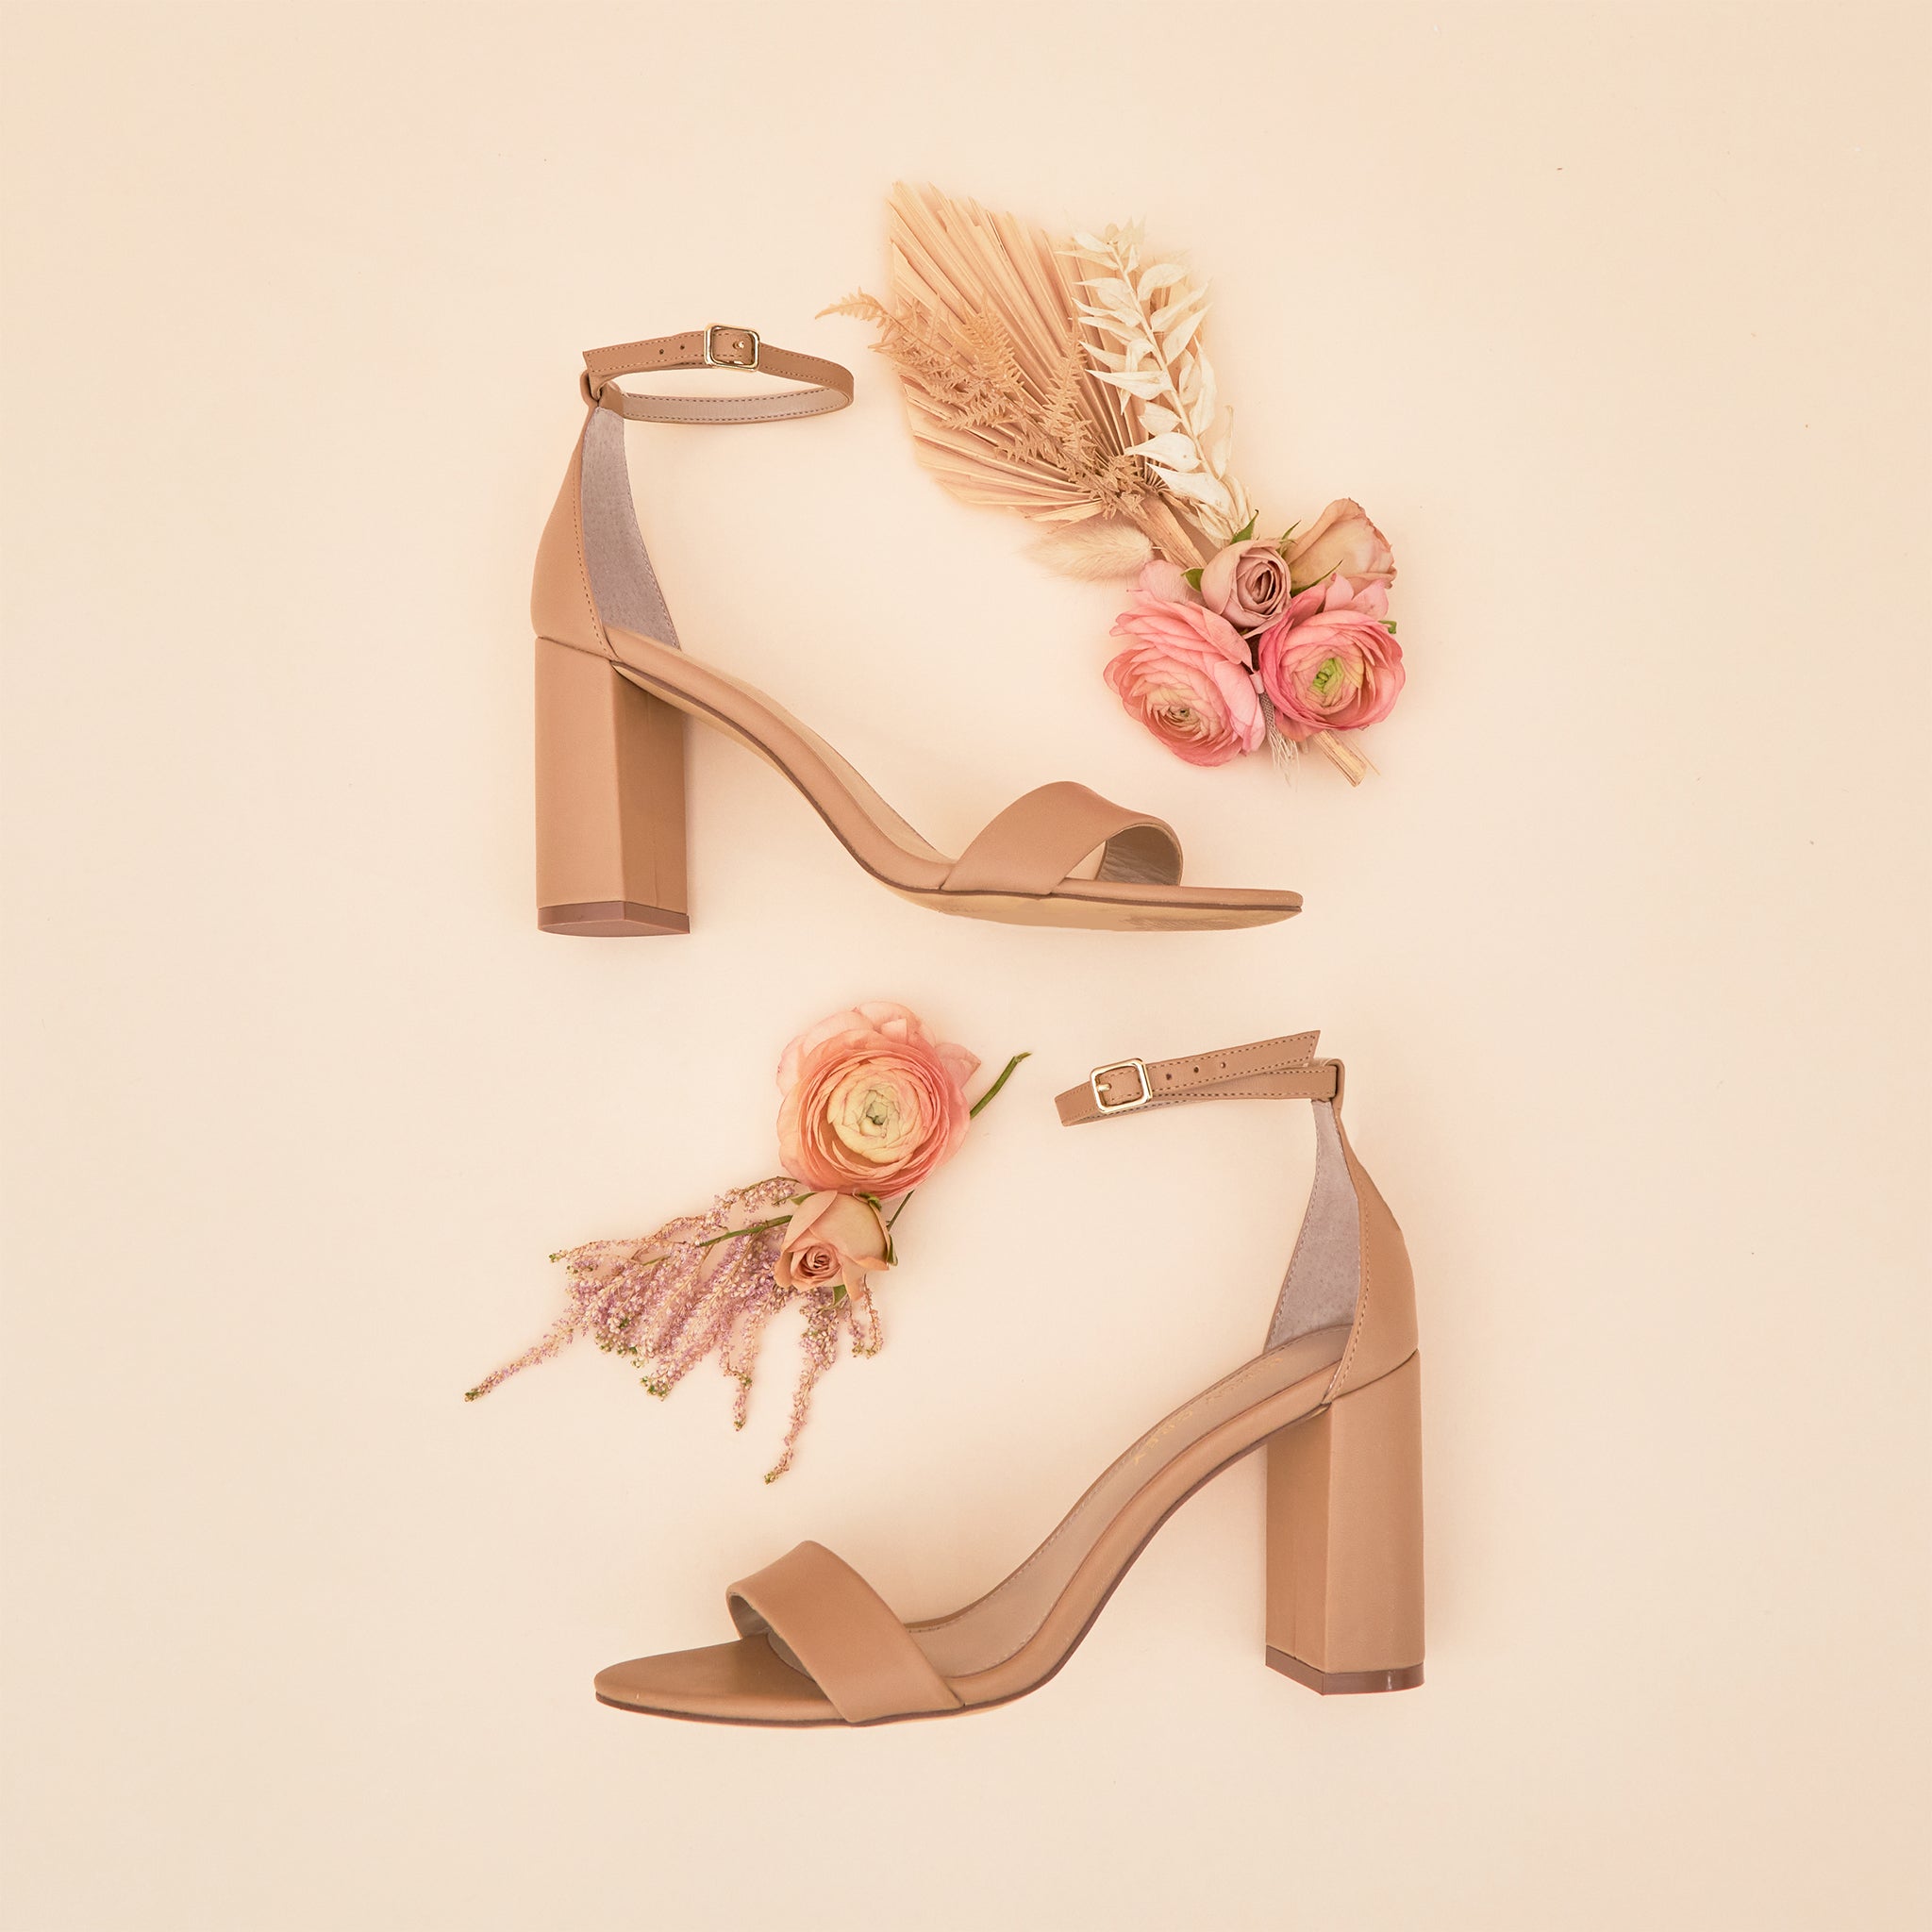 Mary High Chunky Heel in nude latte by Birdy Grey, side view